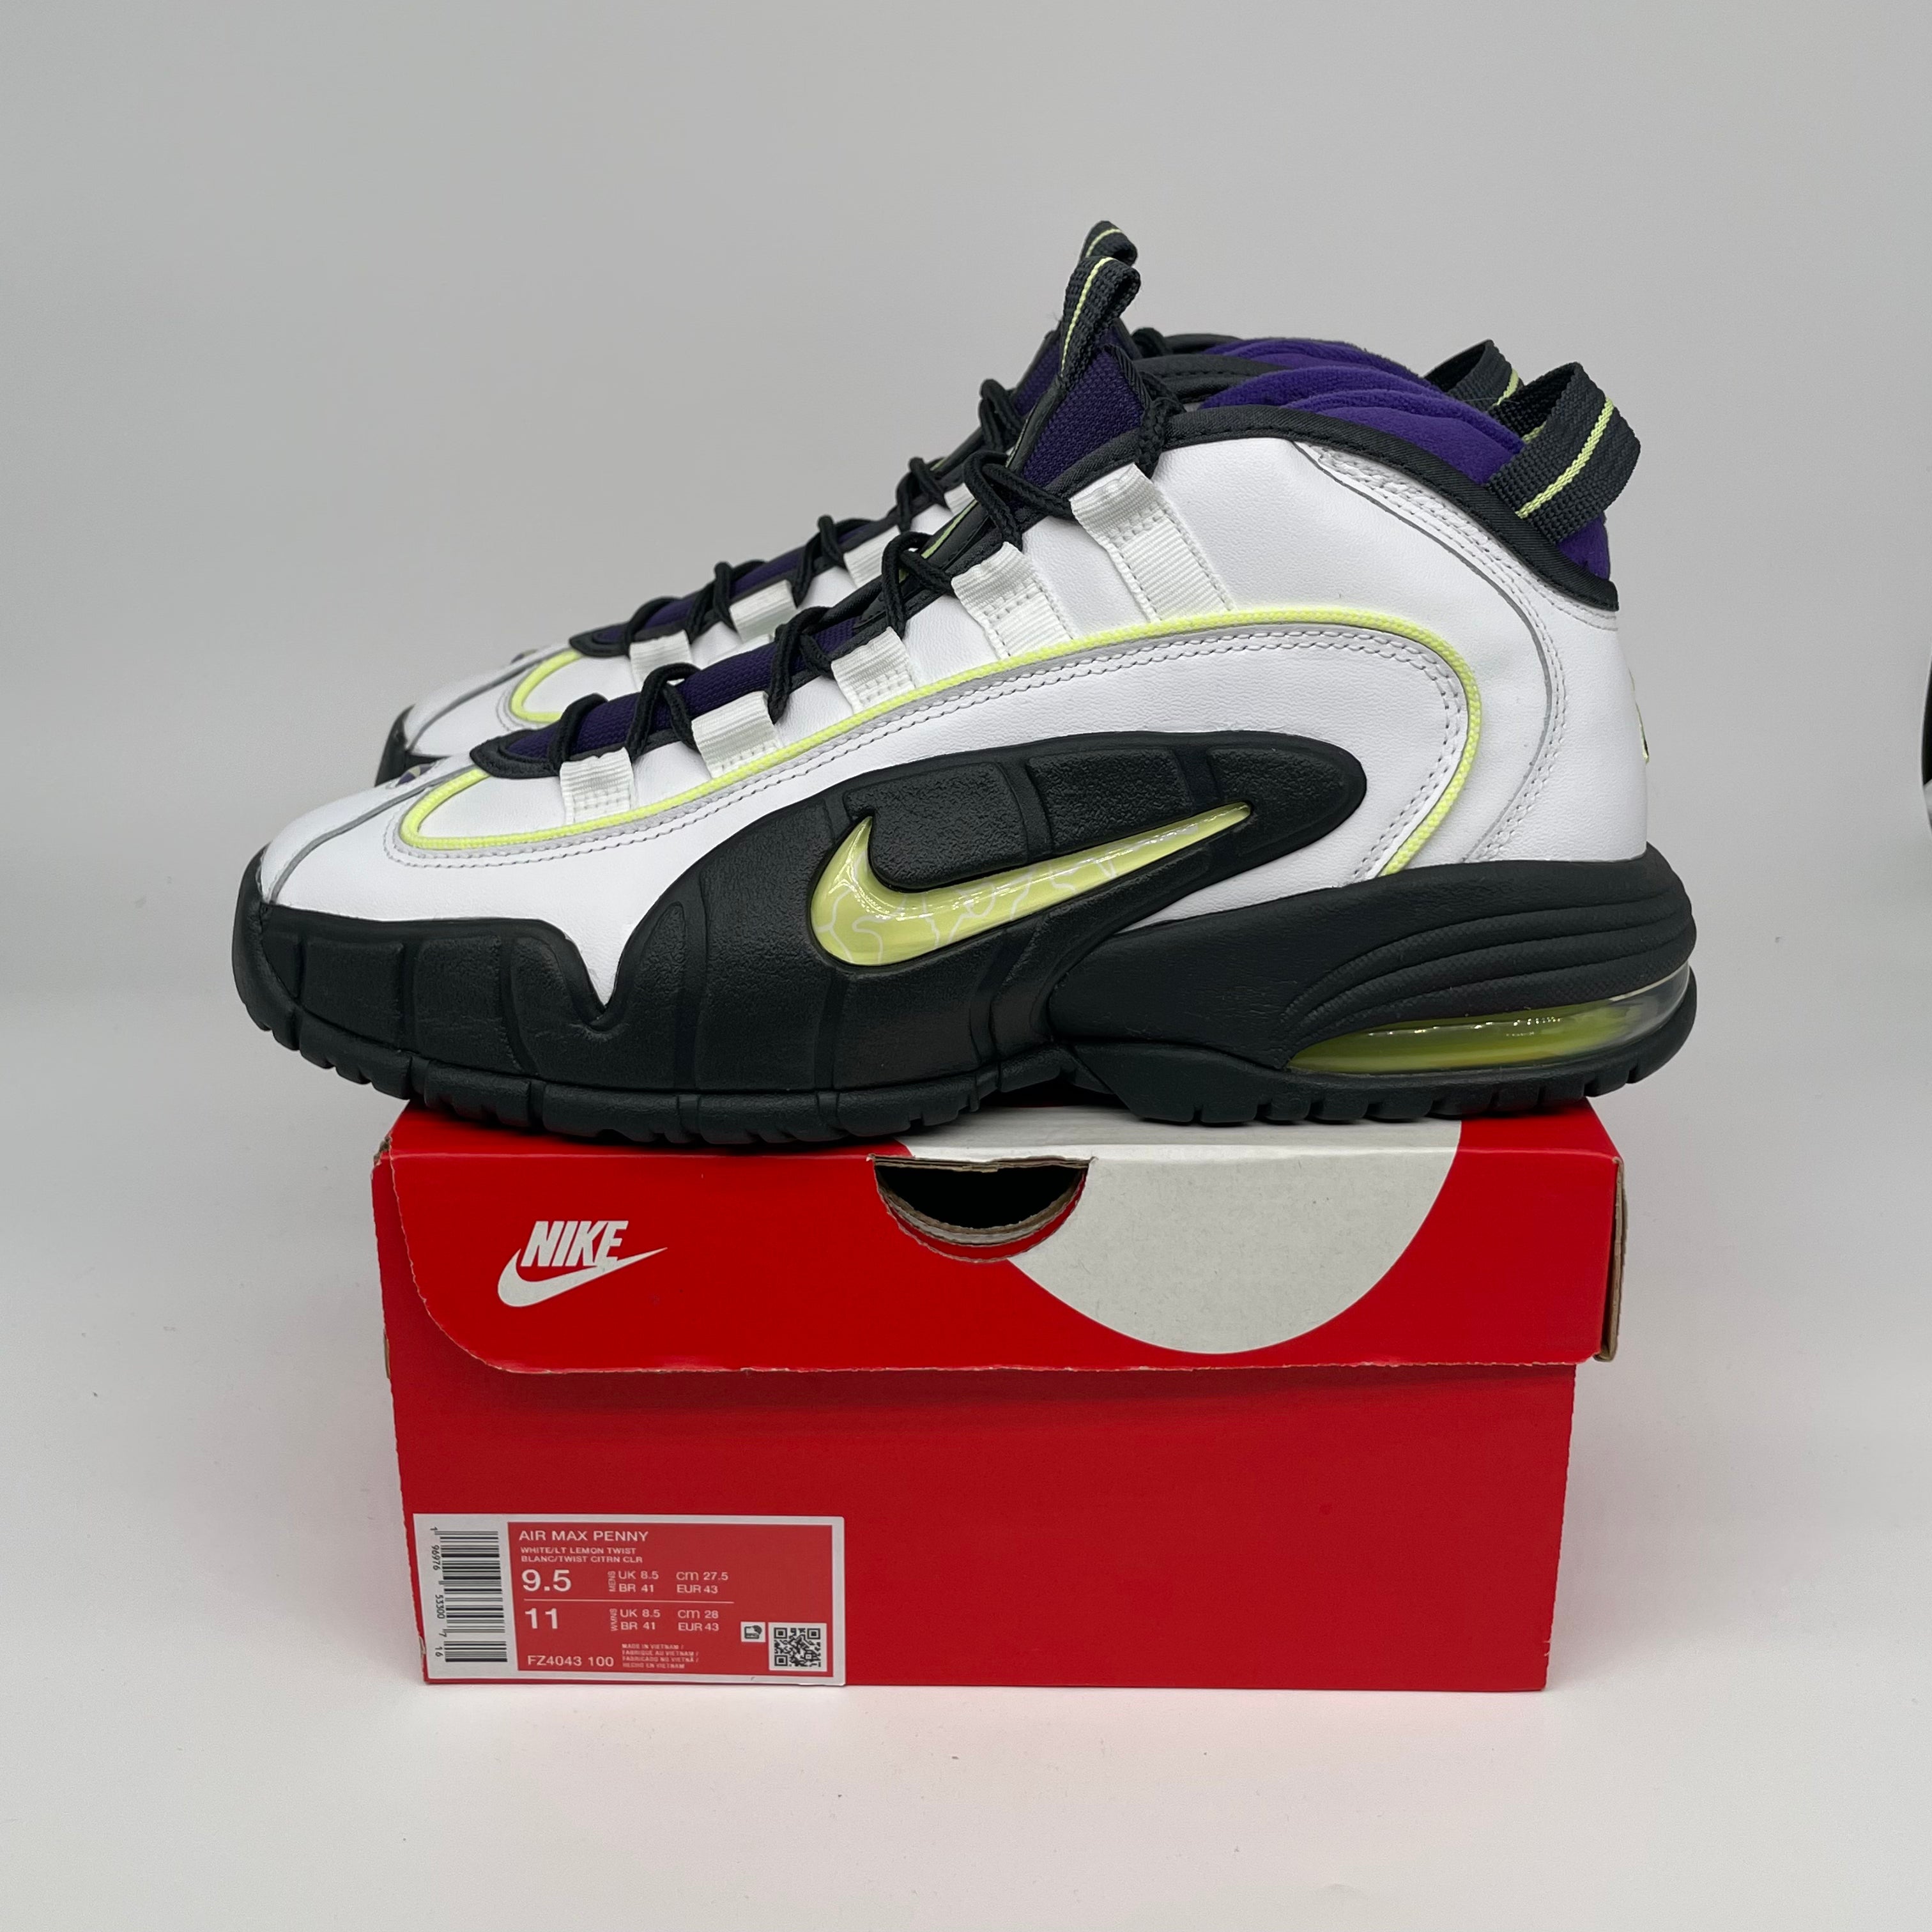 NIKE AIR MAX PENNY 1 PENNY STORY SIZE 9.5 FZ4043-100